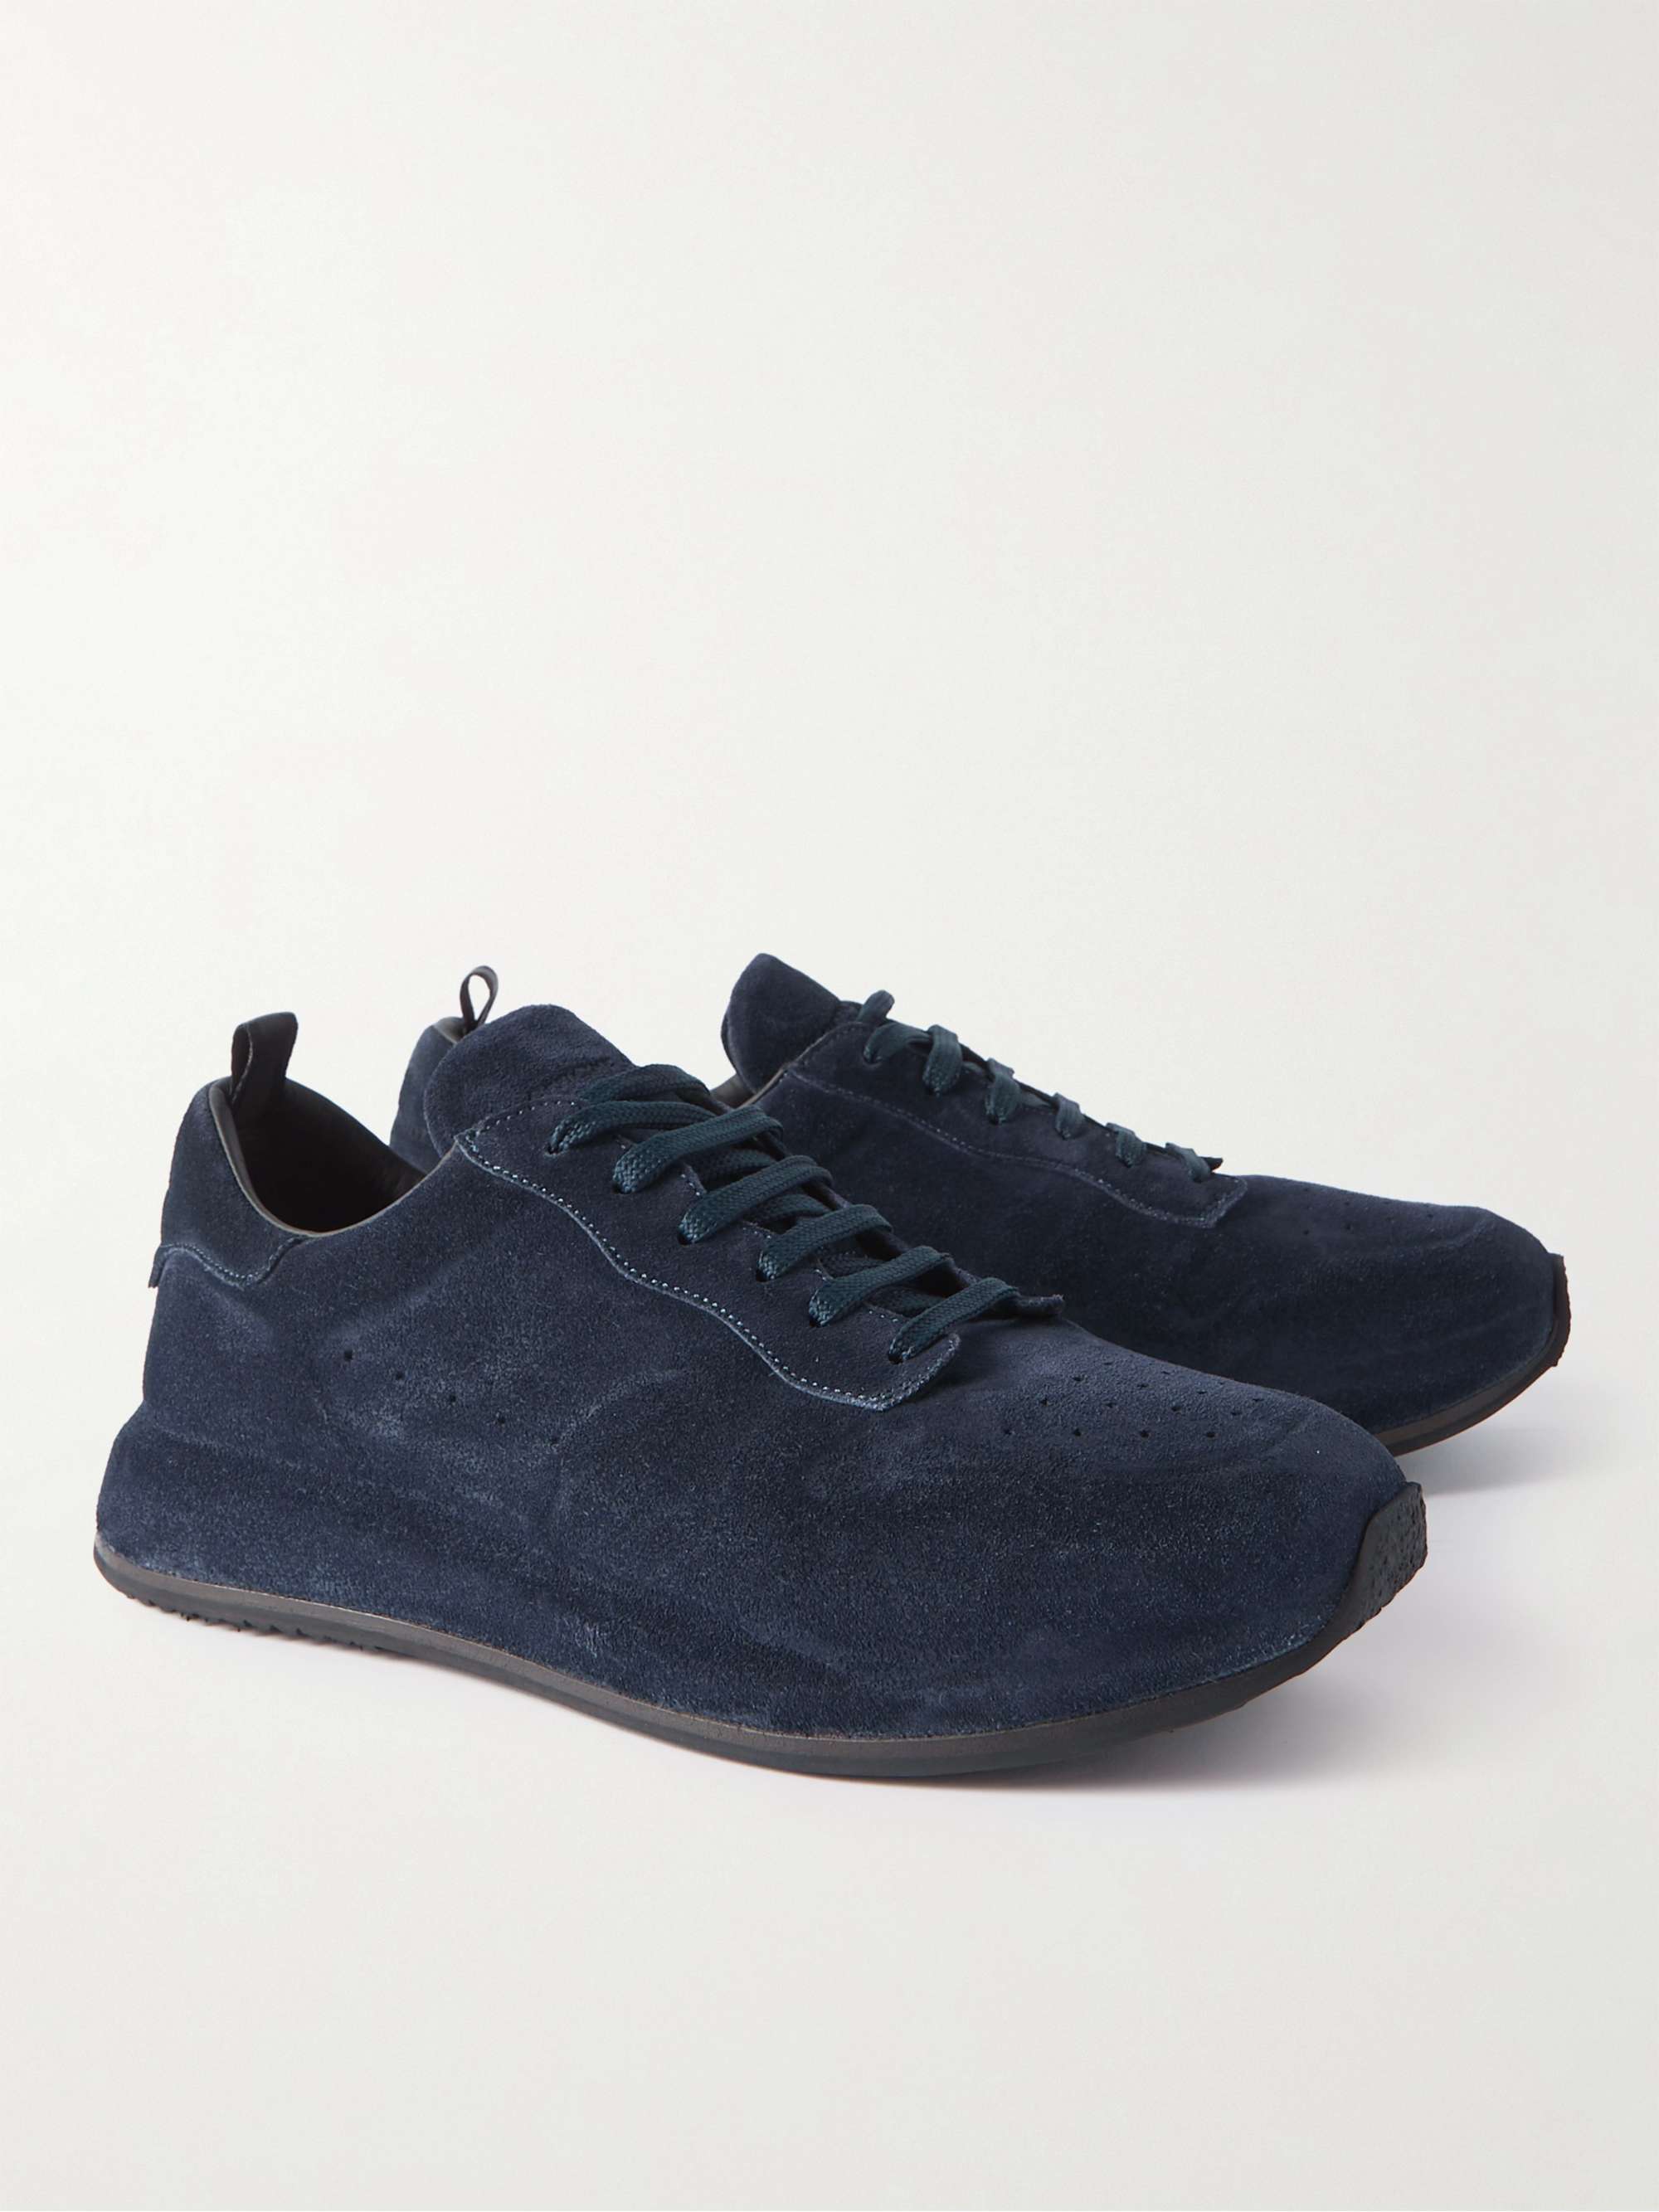 OFFICINE CREATIVE Race Lux Suede Sneakers for Men | MR PORTER